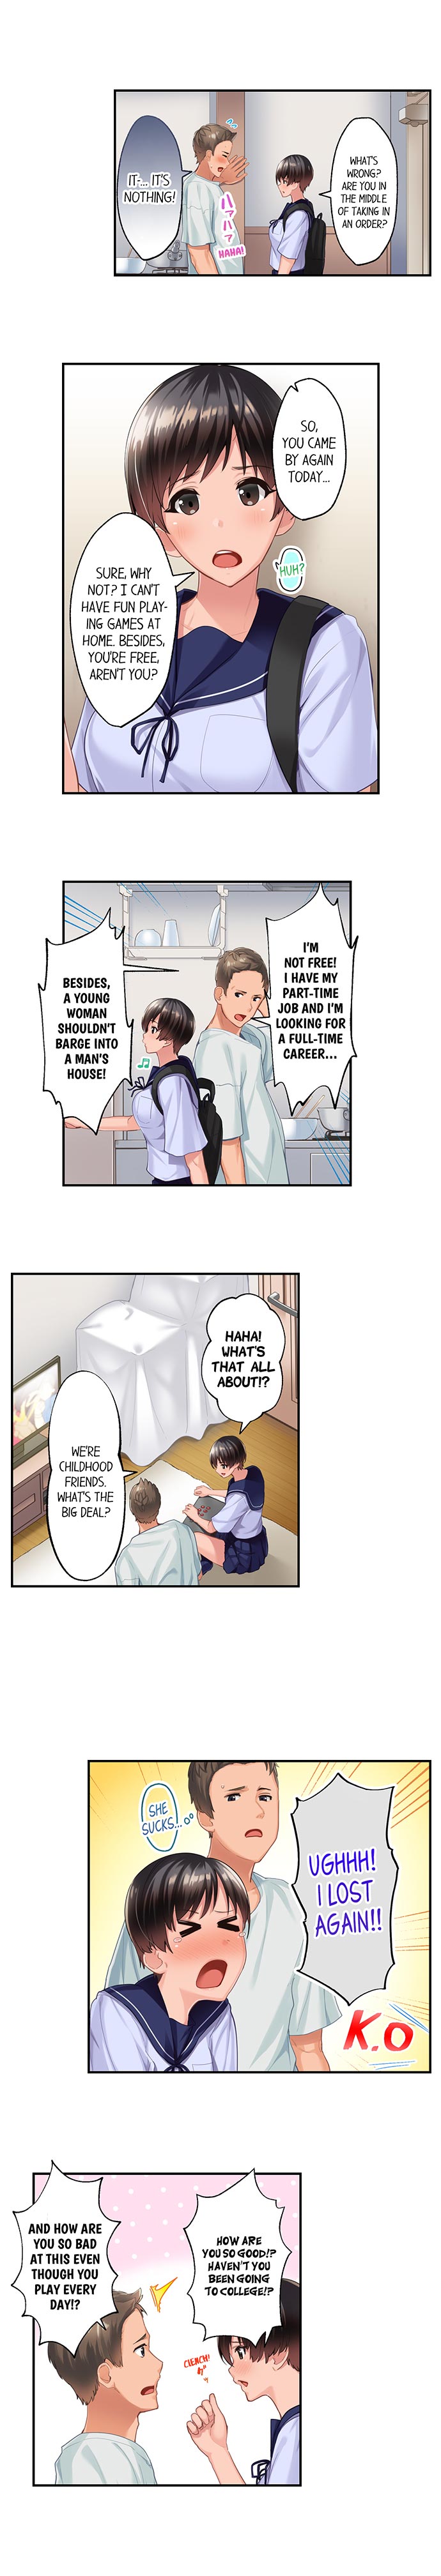 Using 100 Boxes of Condoms With My Childhood Friend! - Chapter 1 Page 3